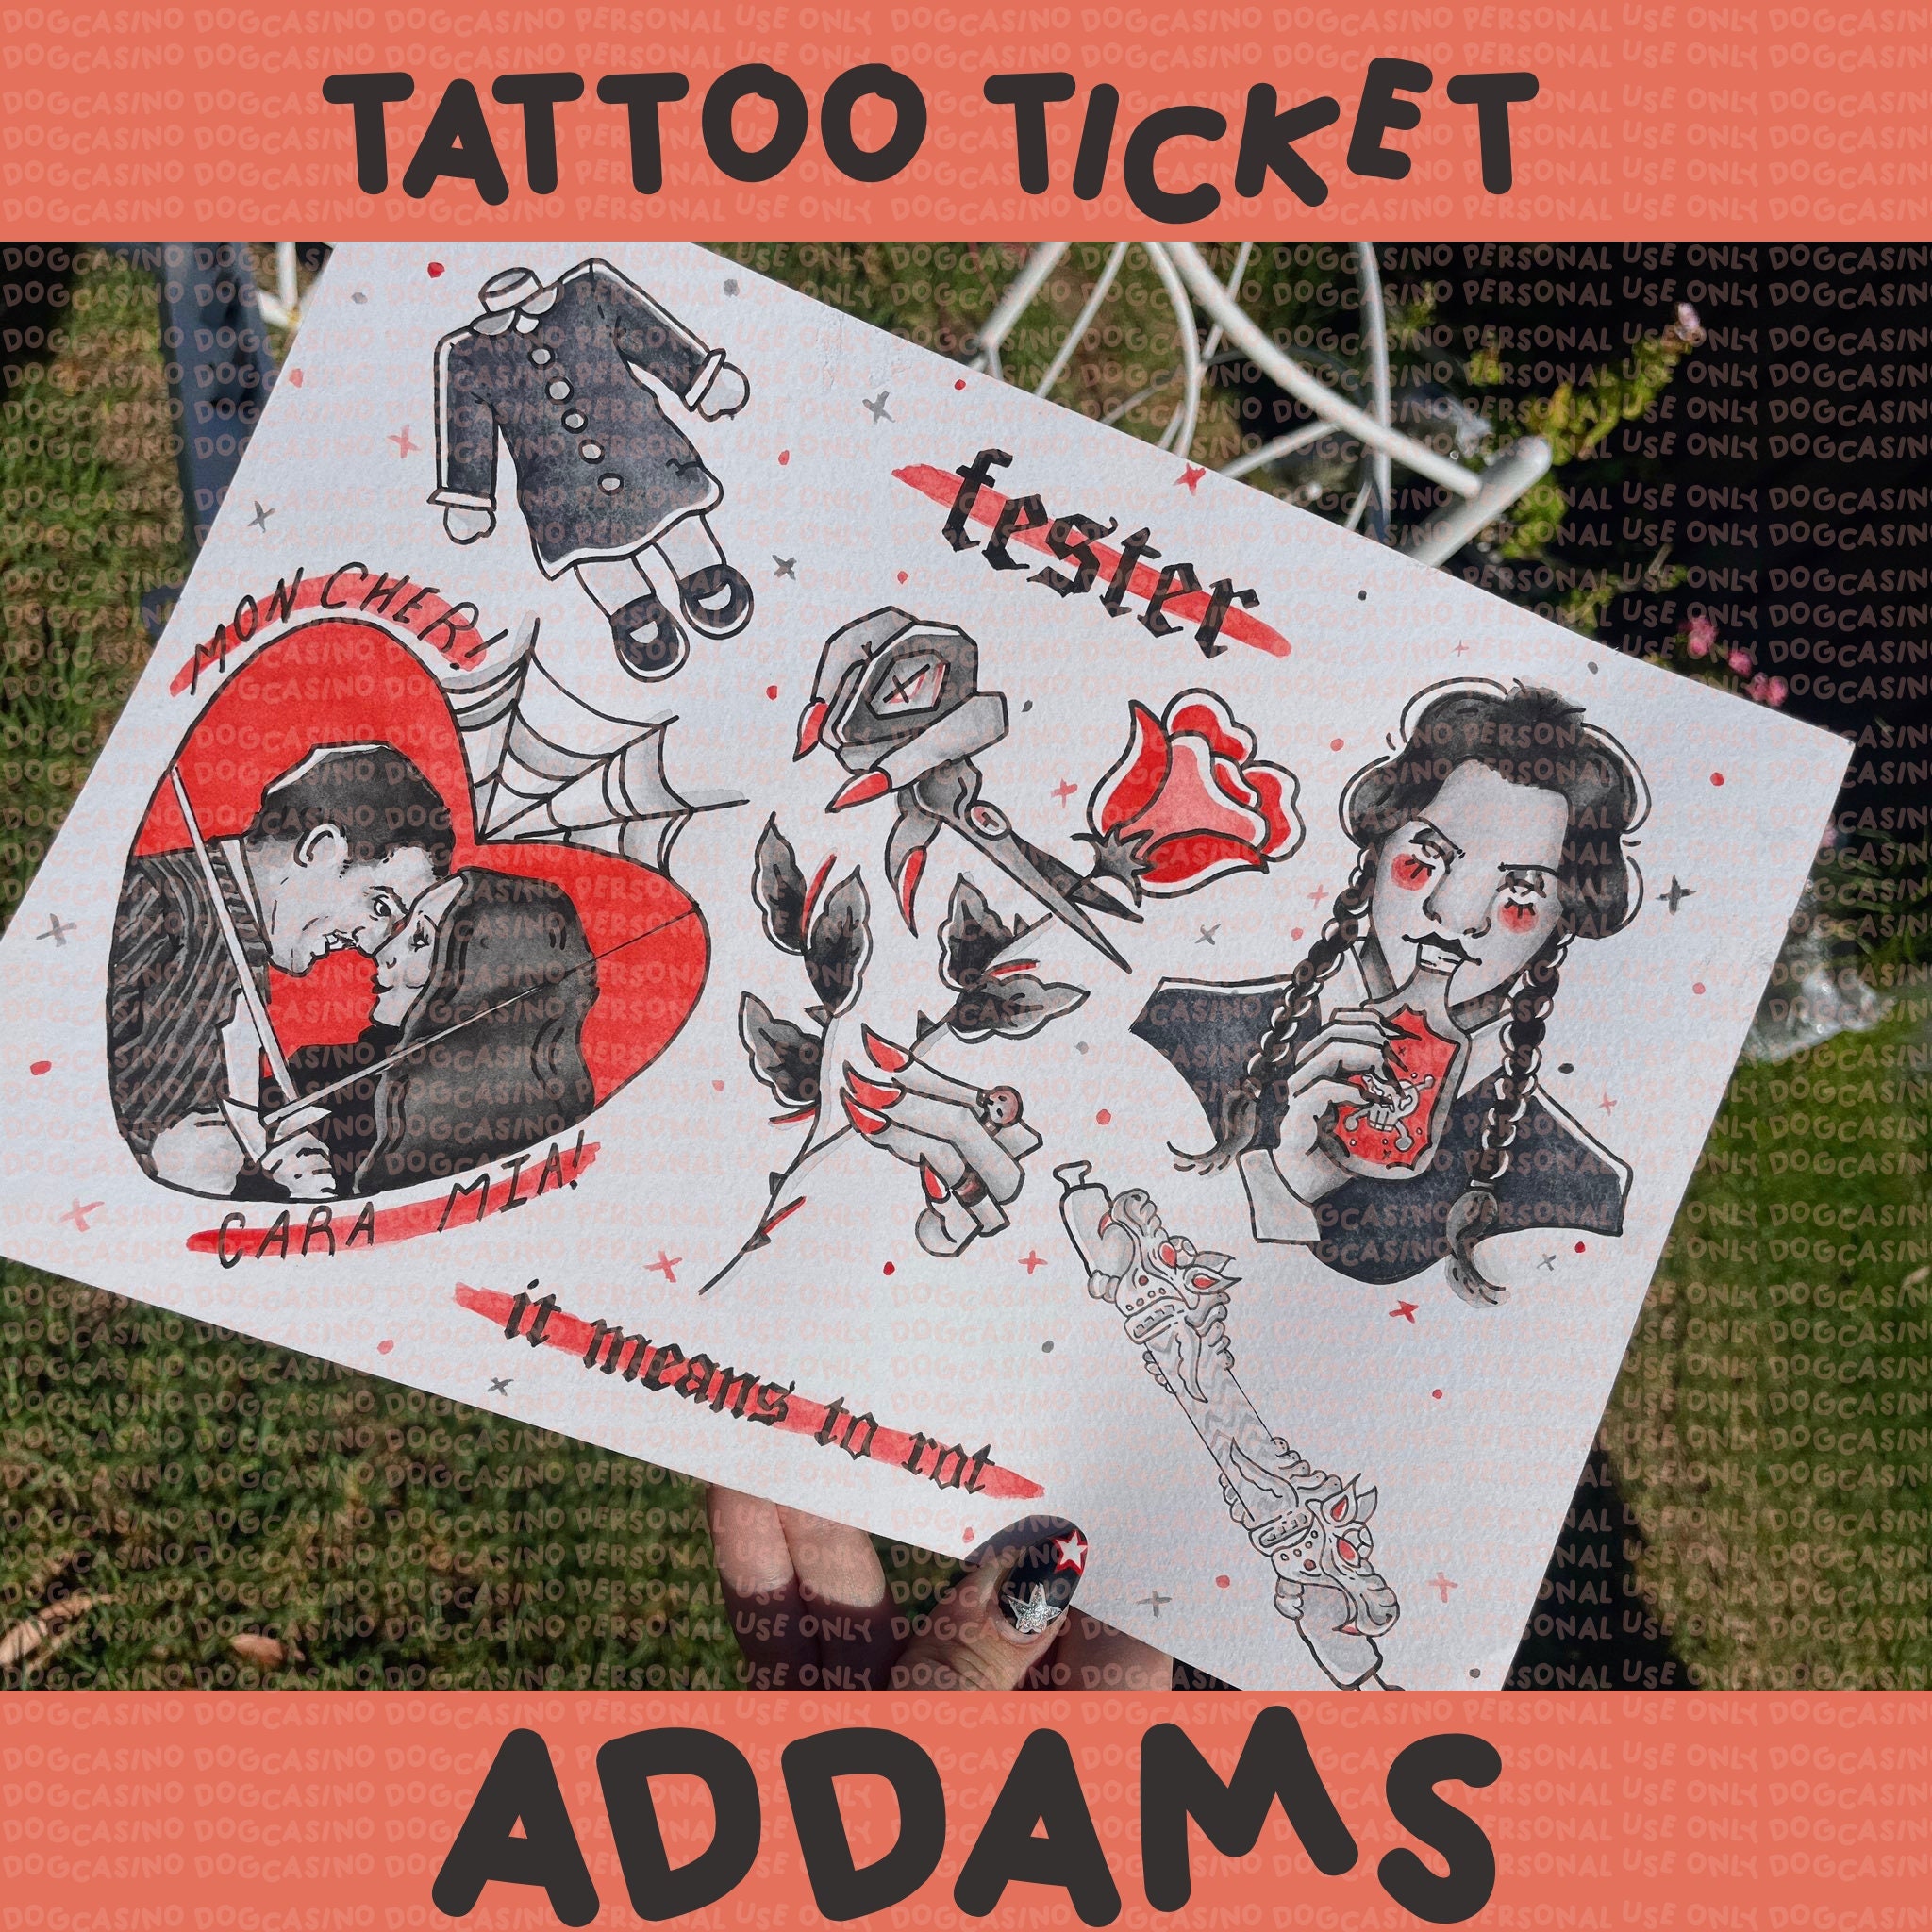 Addams Family Tattoo Stickers for Sale  Redbubble